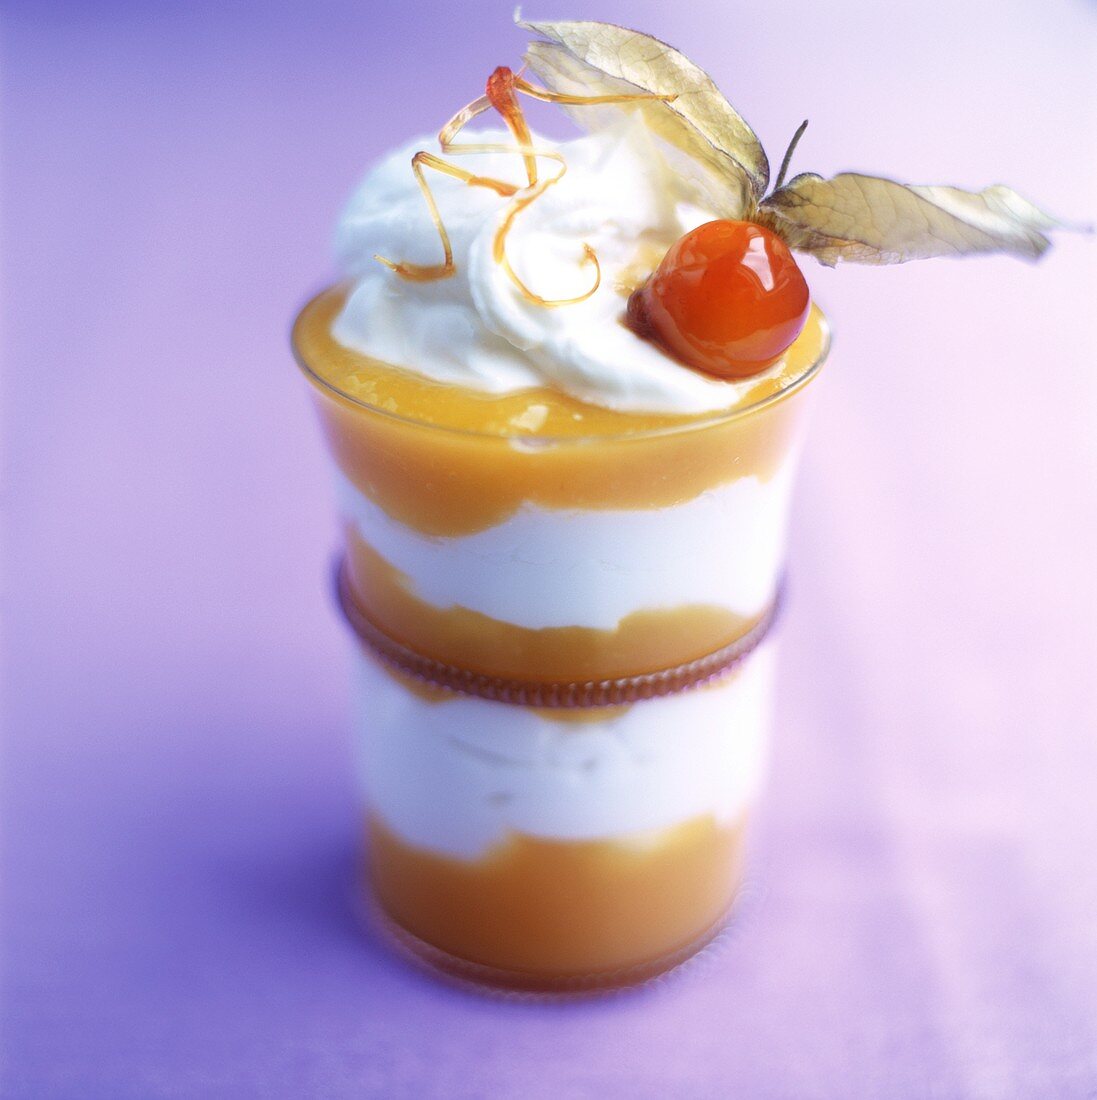 Layered dessert with mango and cream mousse